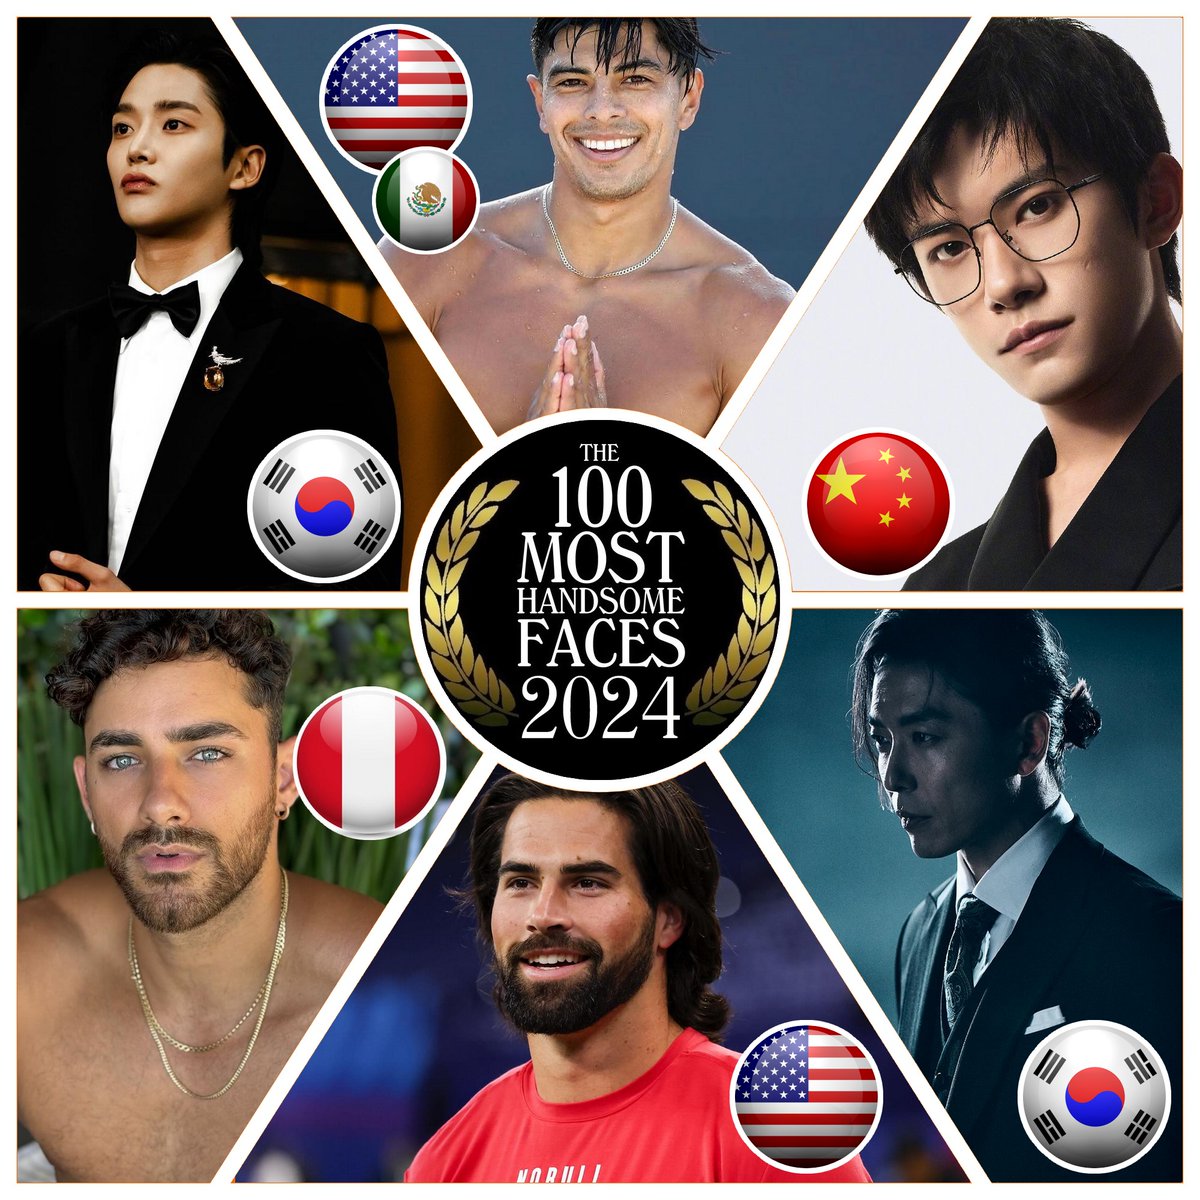 Which Face Should Be Nominated? These are the faces nominated today. Nominate & Vote for the Top 100 of 2024 -patreon.com/tccandler #tccandler #100faces2024 #rowoon #sf9 #horaciogutierrez #jacksonyee #austinpalao #samhartman #KimJaeWook